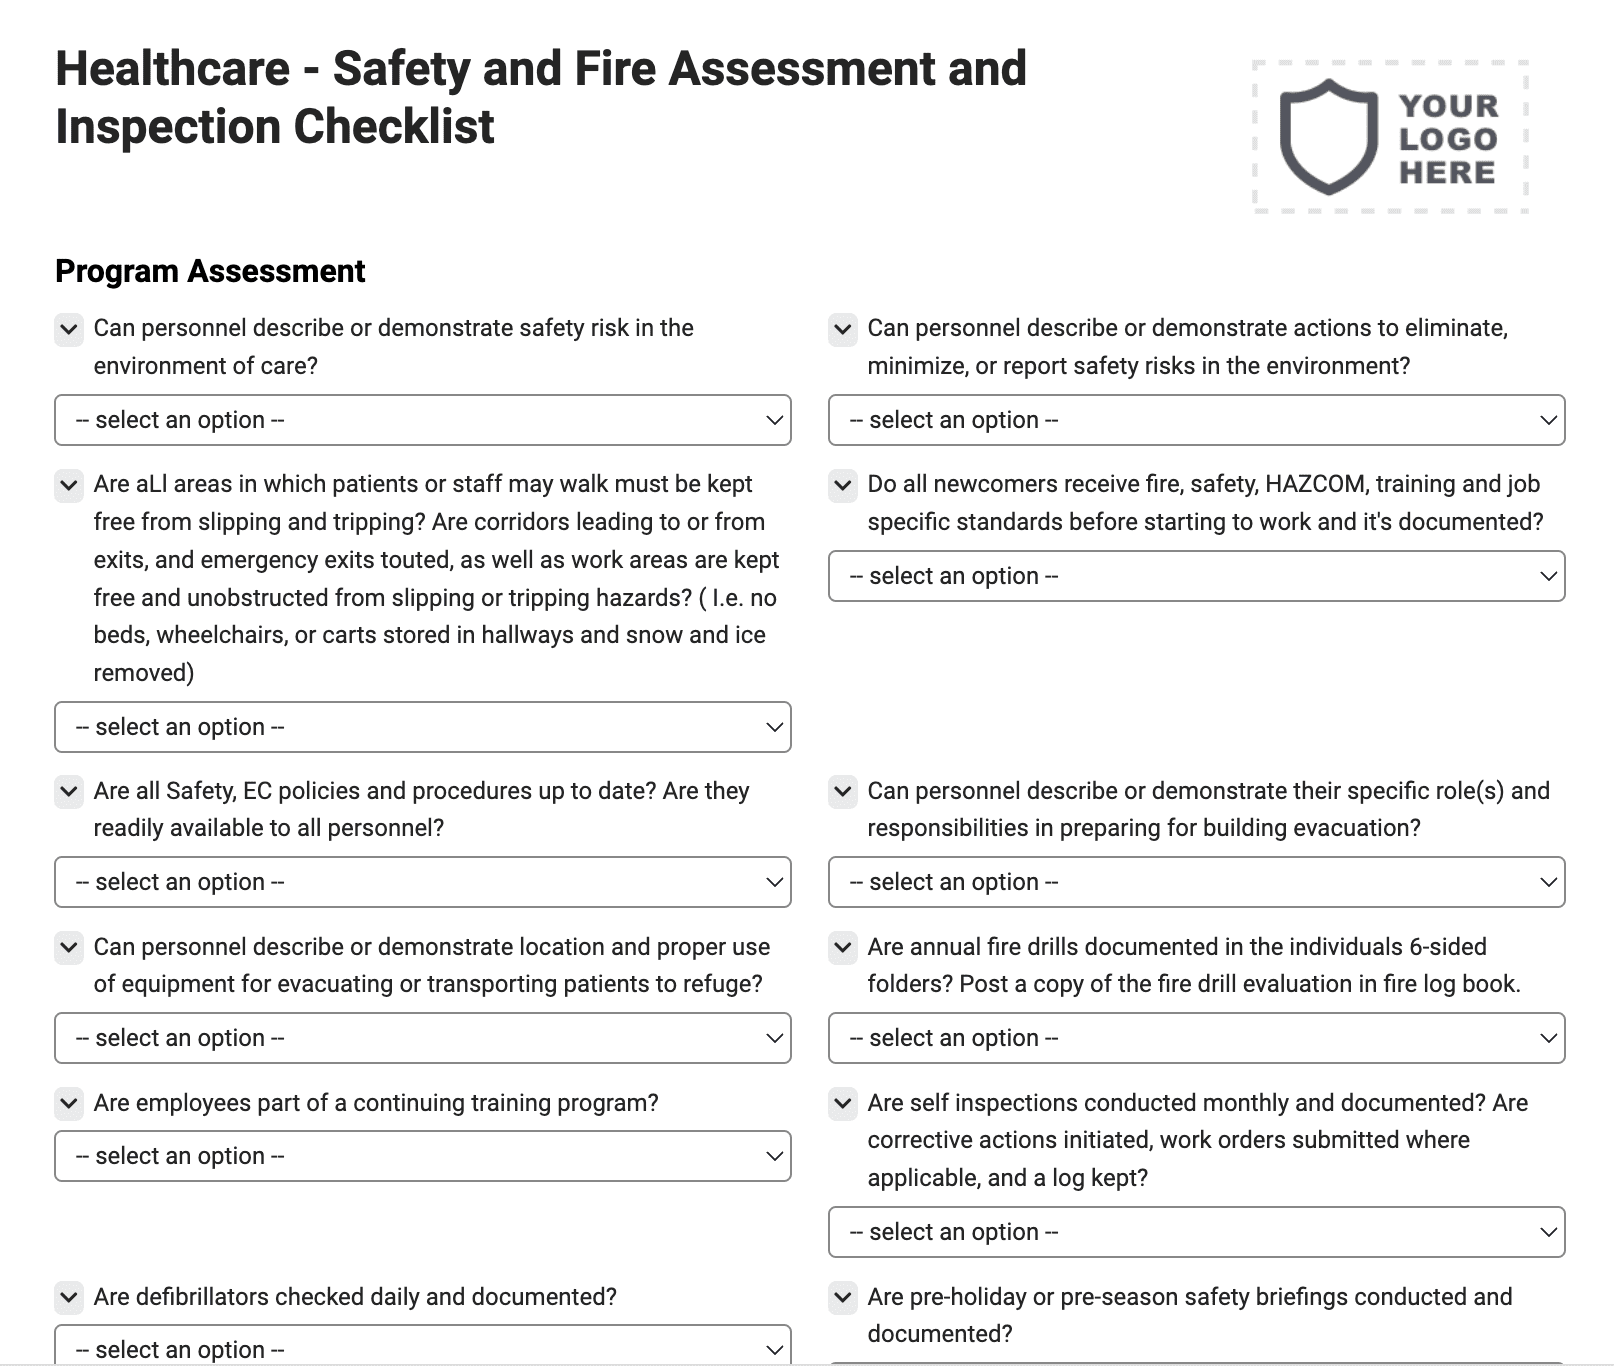 Healthcare - Safety and Fire Assessment and Inspection Checklist